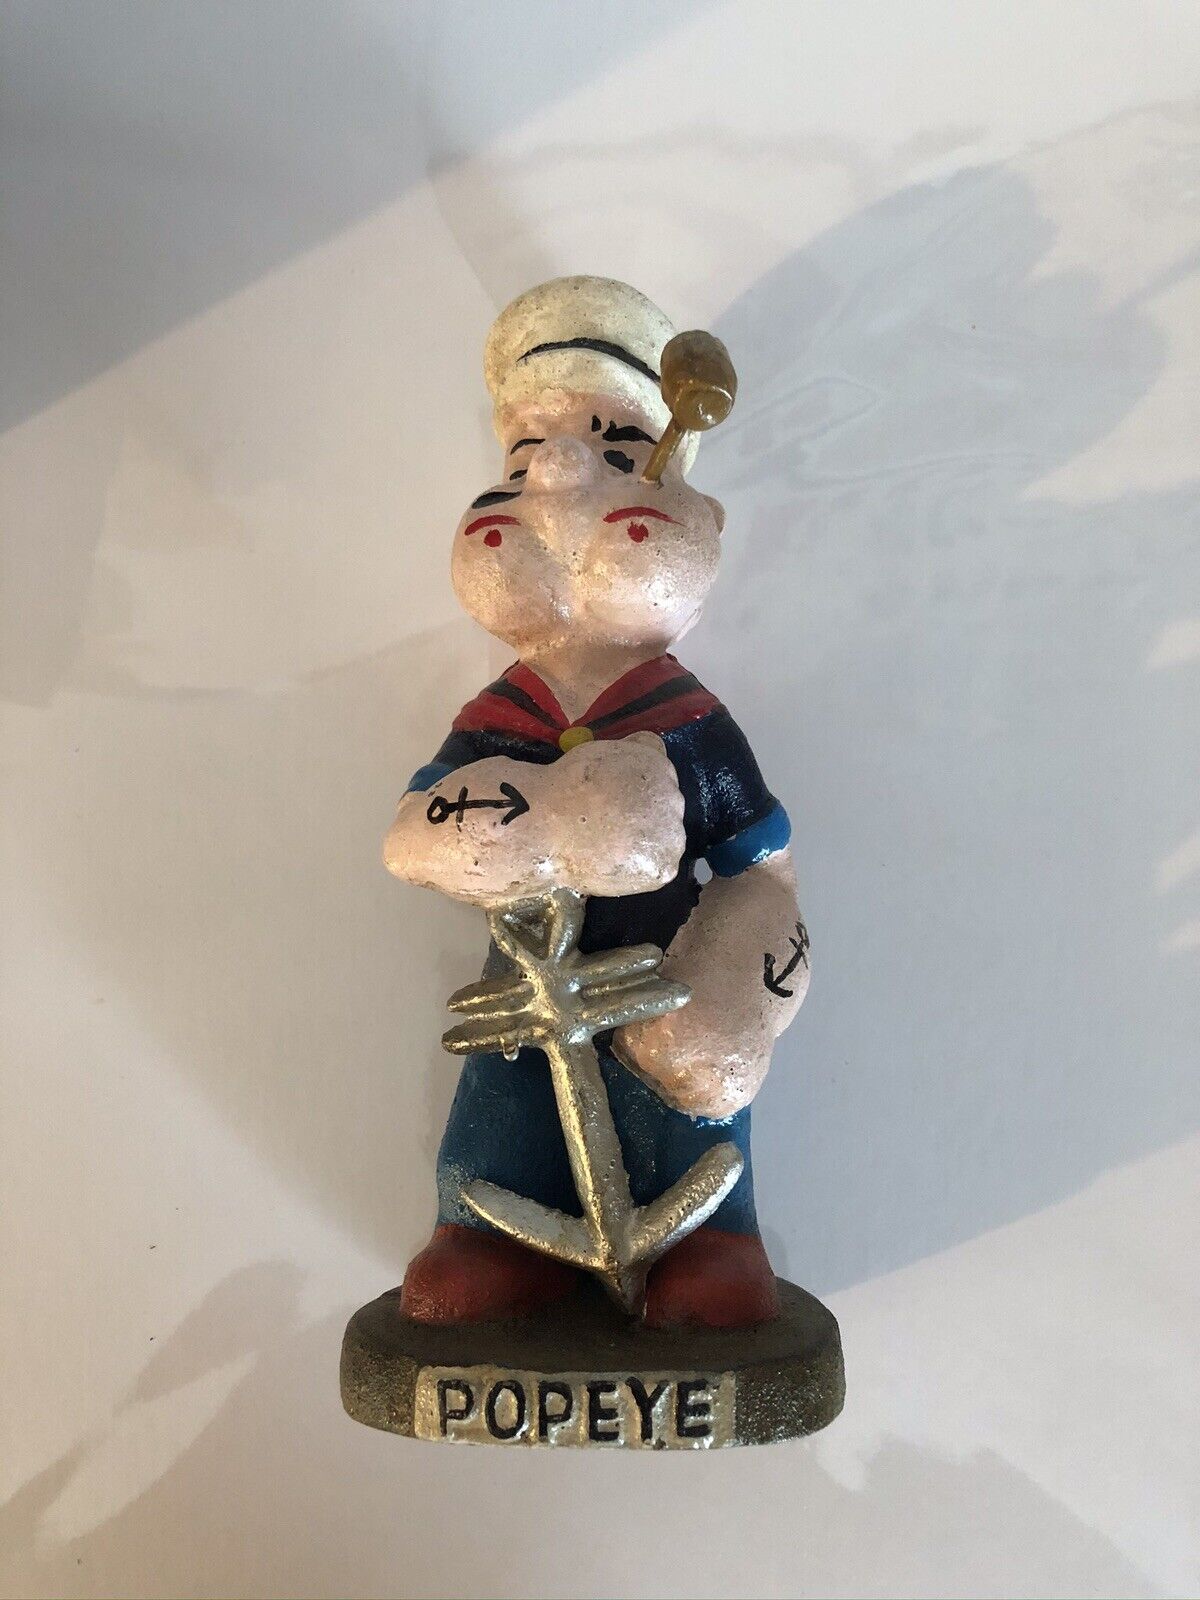 Popeye the Sailor Man with Ship Anchor Cast Iron 8” Tall Vintage-Style Statue